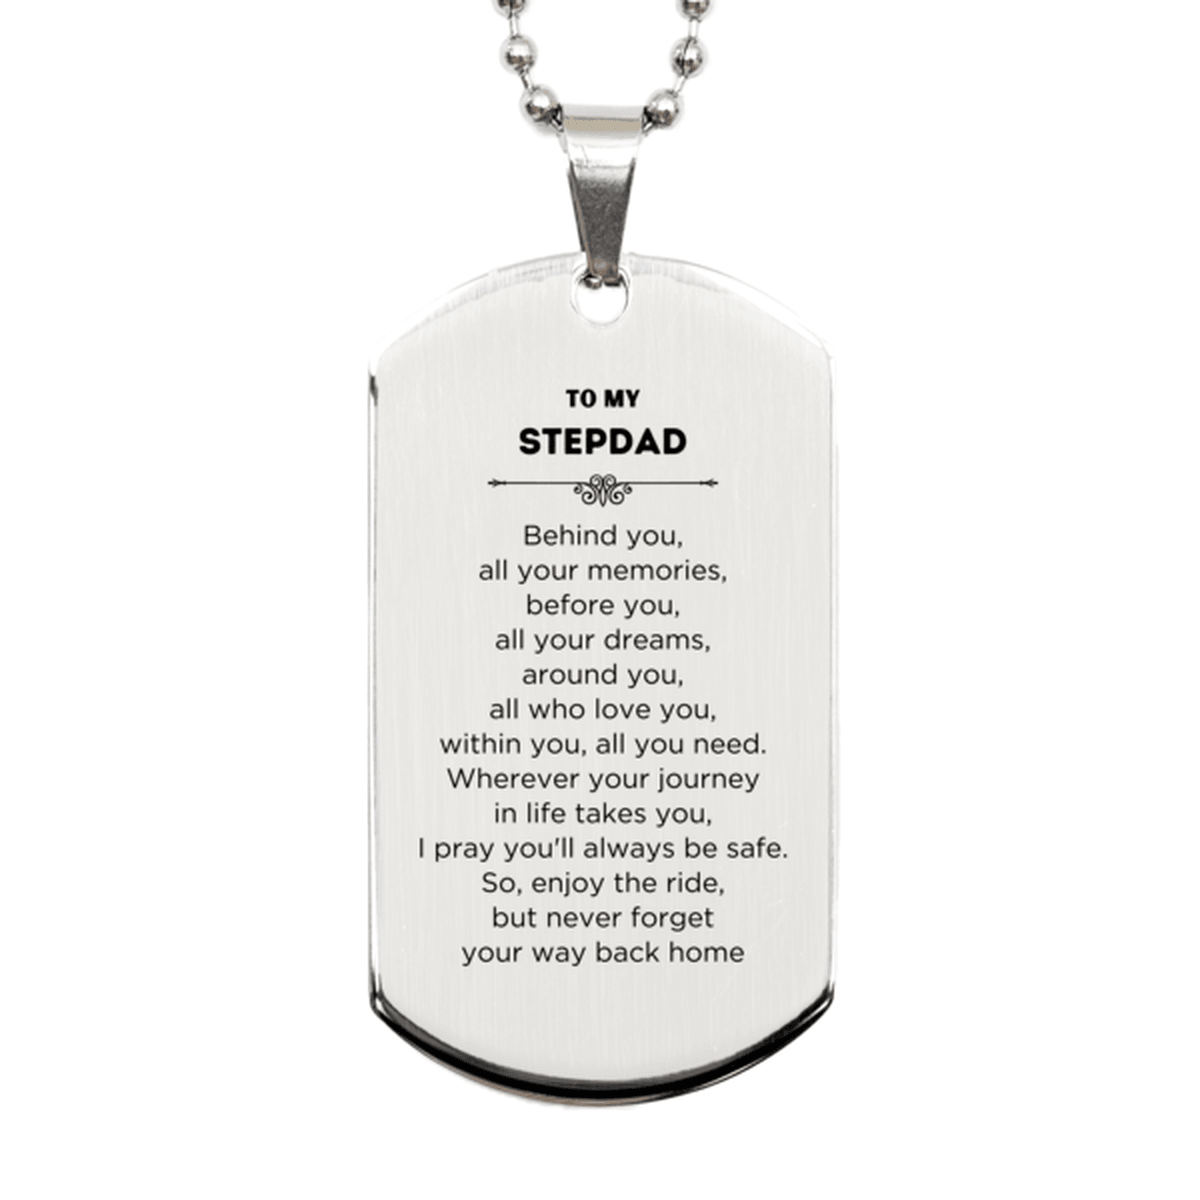 To My Stepdad Gifts, Inspirational Stepdad Silver Dog Tag, Sentimental Birthday Christmas Unique Gifts For Stepdad Behind you, all your memories, before you, all your dreams, around you, all who love you, within you, all you need - Mallard Moon Gift Shop